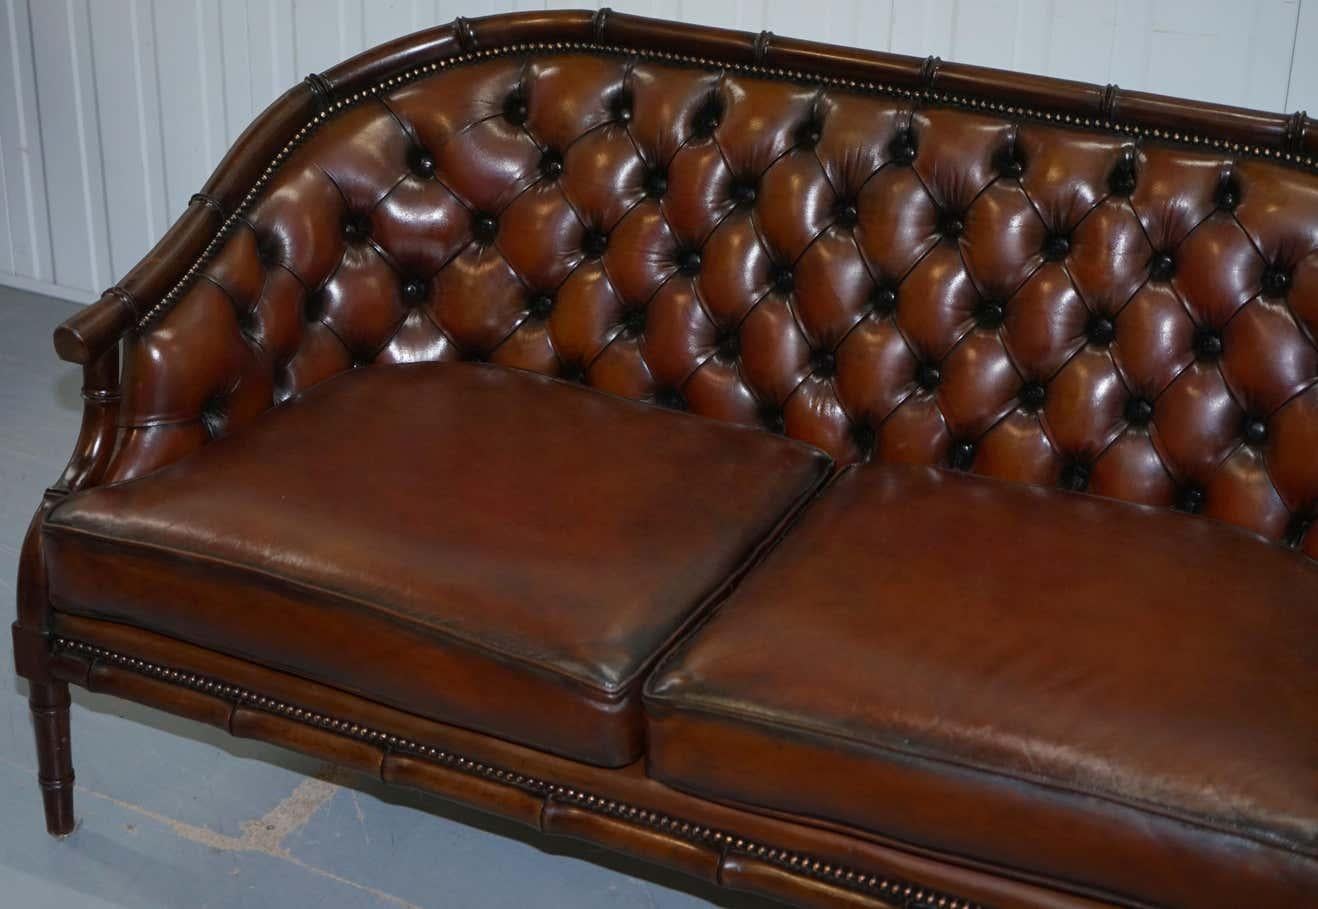 We are delighted to offer this circa 1900’s Regency style fully restored Chesterfield sofa with Famboo framework.

I have two pairs of matching armchairs listed under my other items so four armchairs in total 

A very desirable and highly